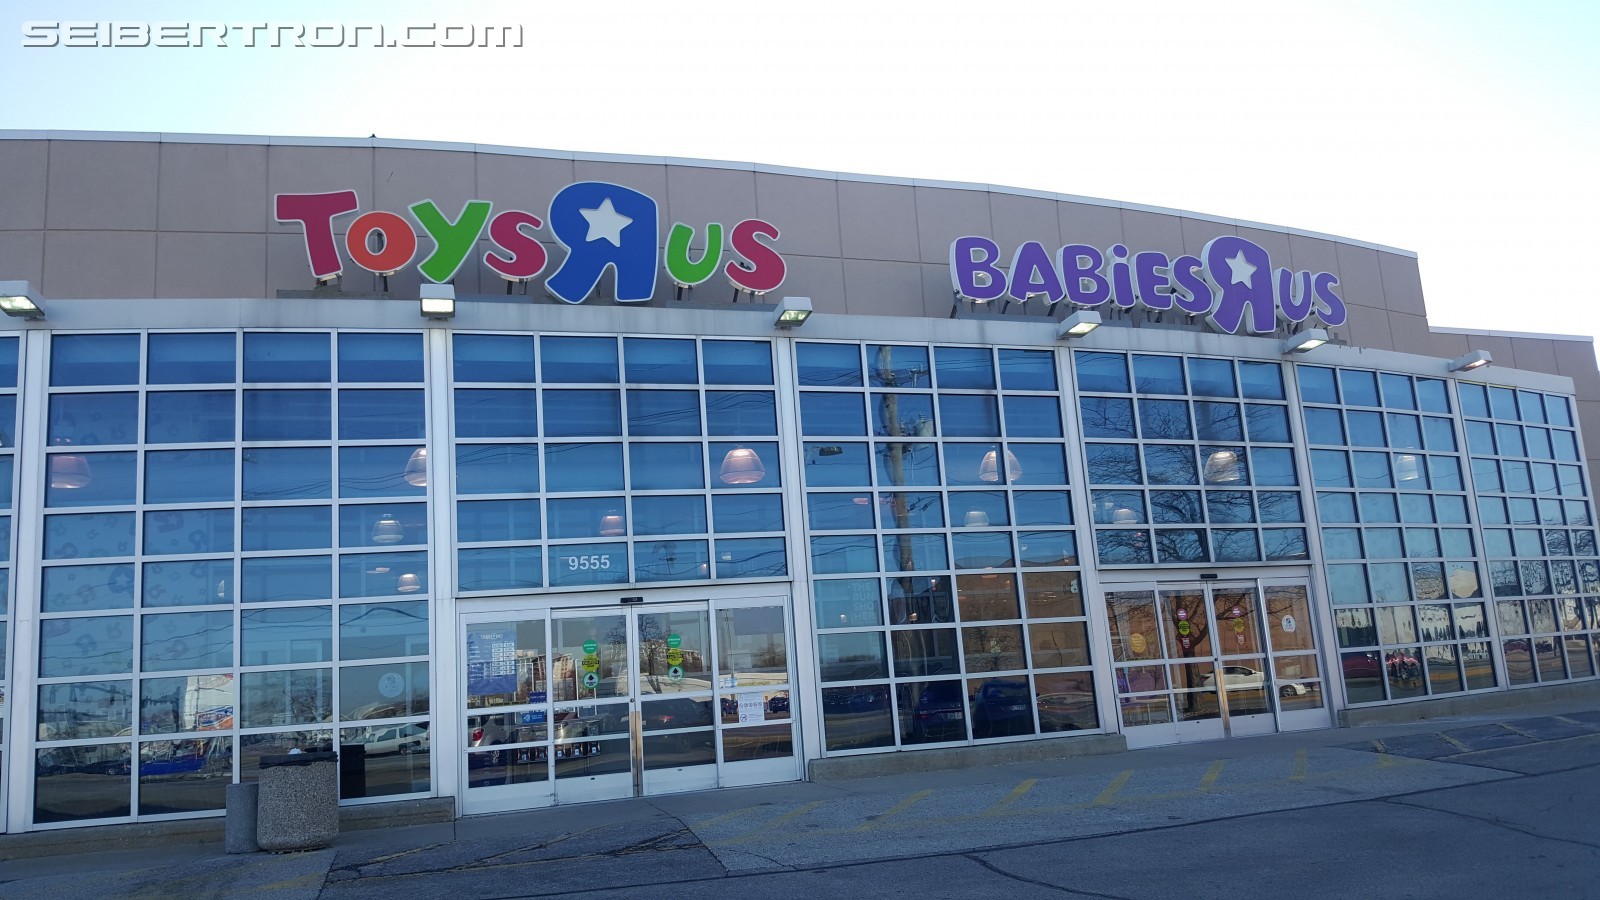 Transformers News: Toys R Us Liquidation Sale starts Friday March 23rd at most stores #savetoysurs